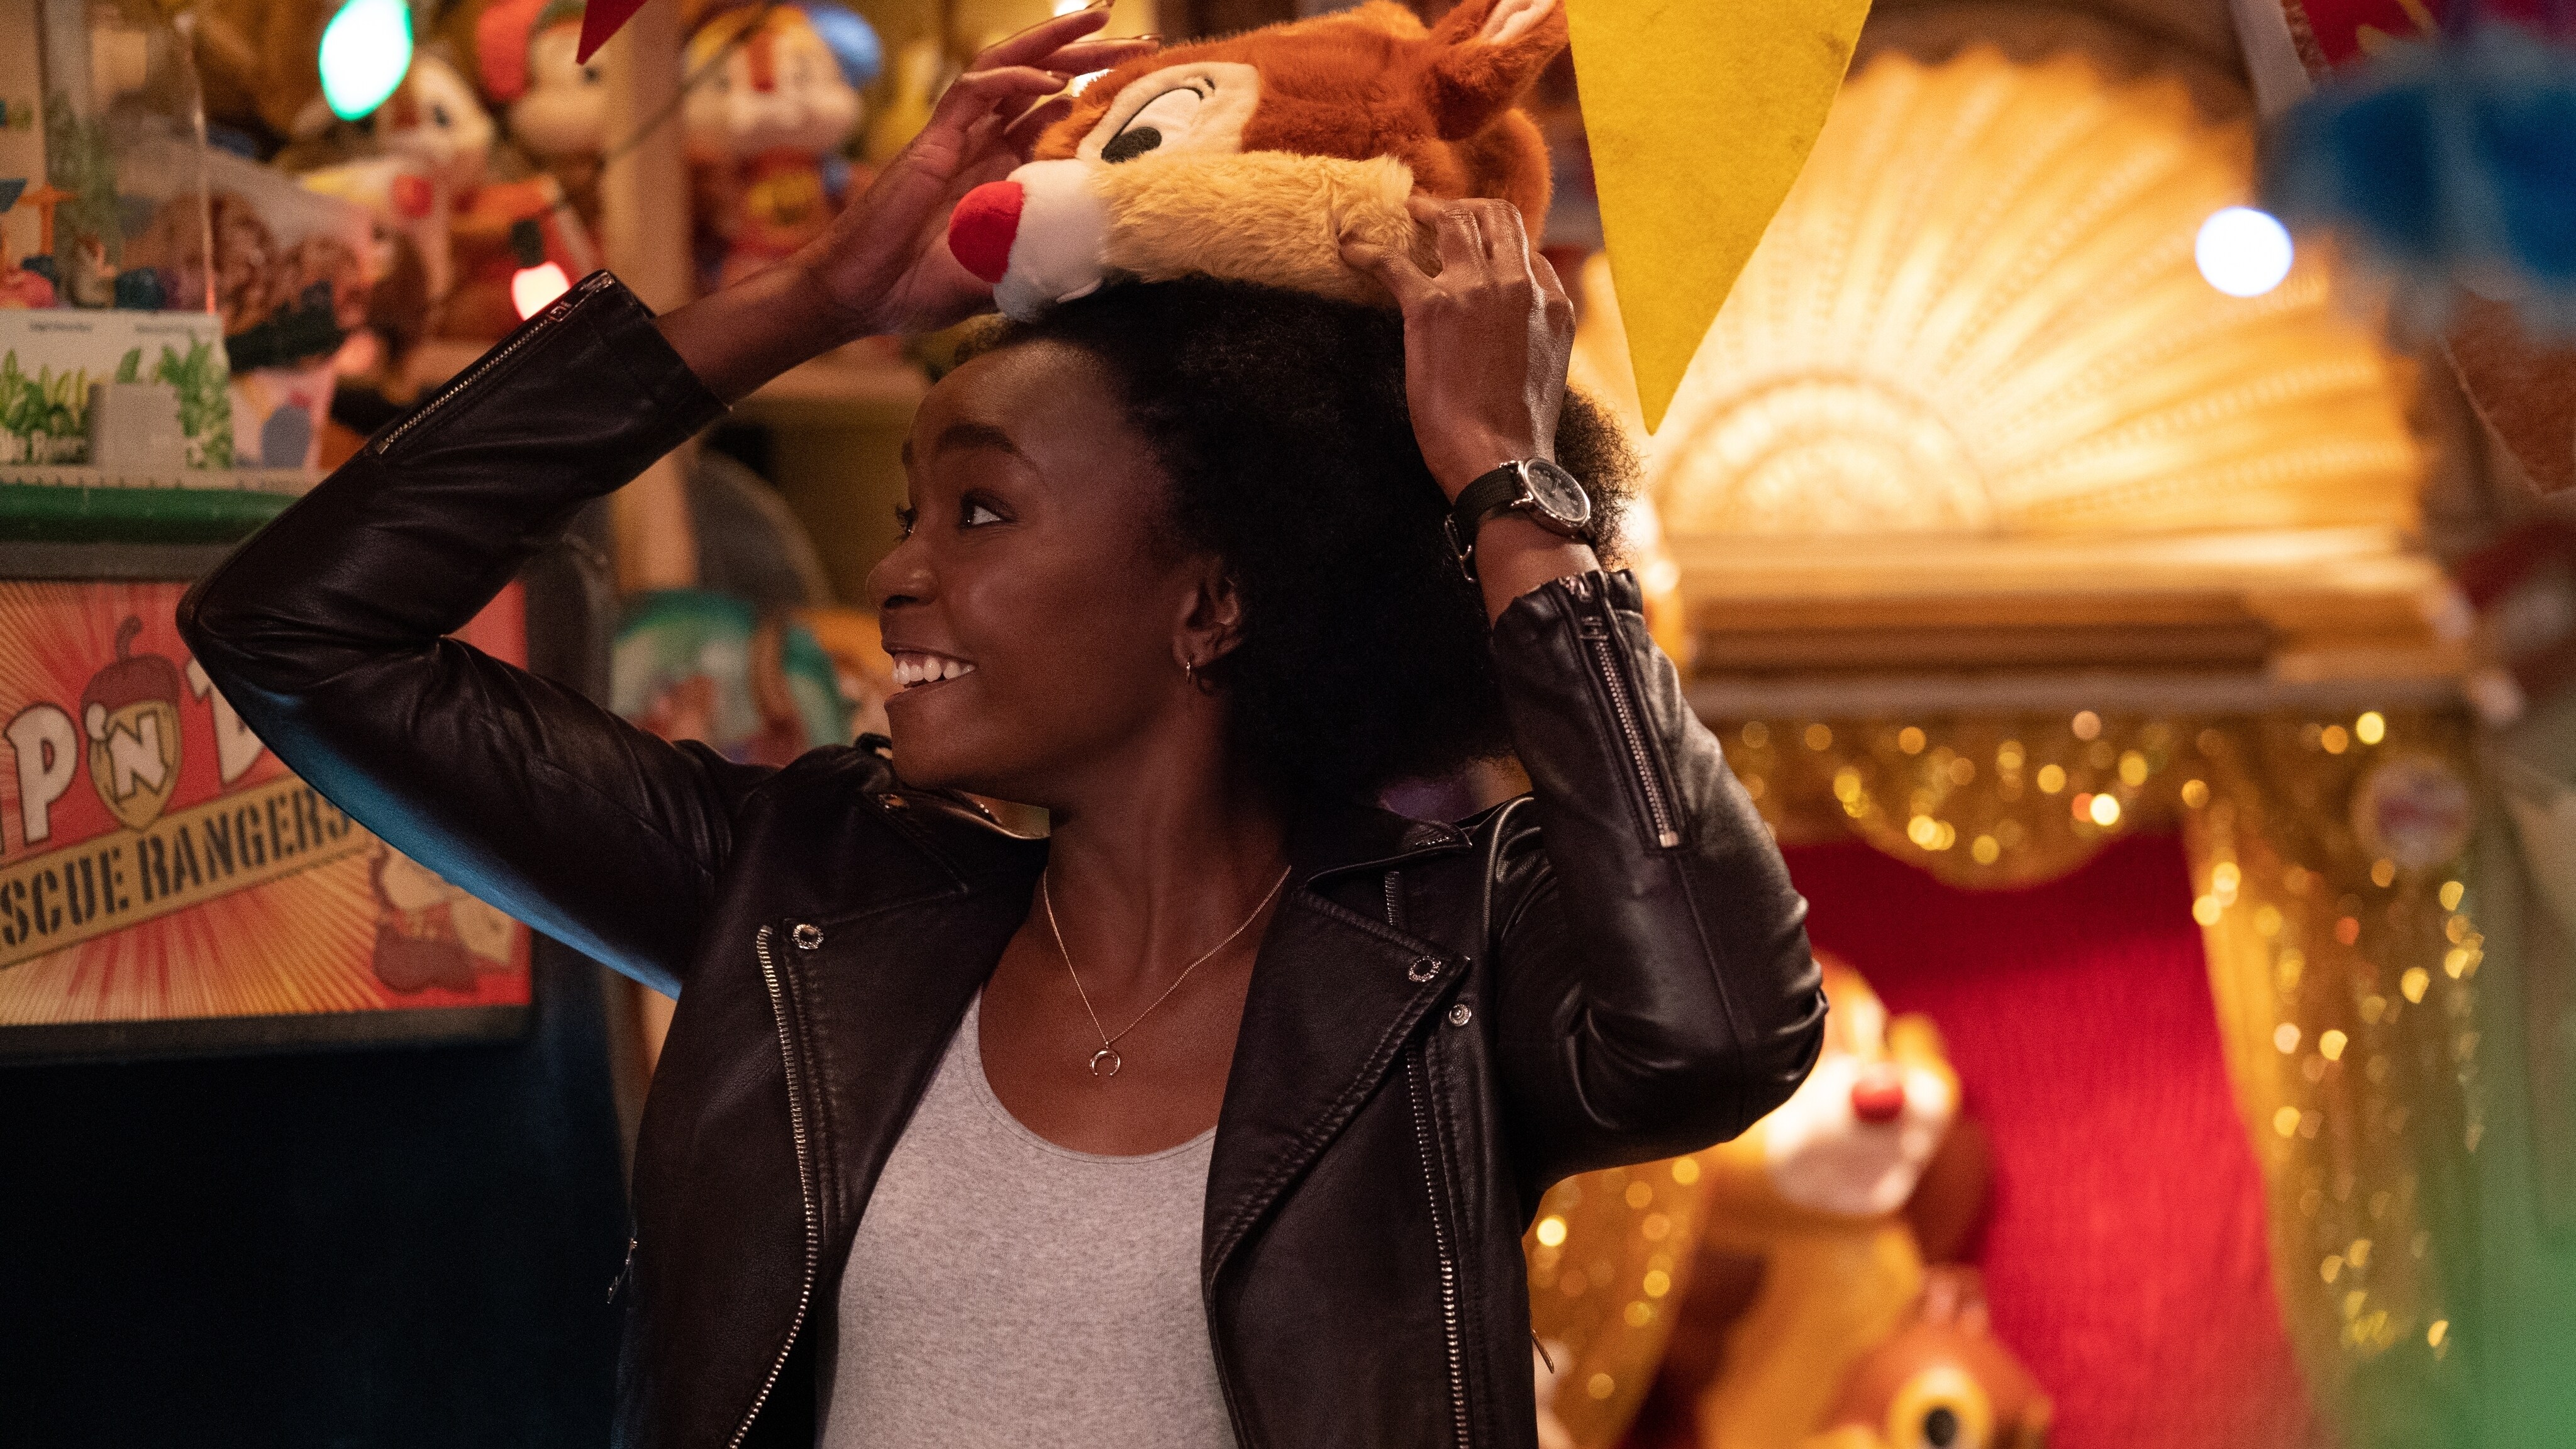 Kiki Layne as "Ellie" in Disney's live-action CHIP 'N DALE: RESCUE RANGERS, exclusively on Disney+. Photo by Hilary Bronwyn Gayle, SMPSP. © 2022 Disney Enterprises, Inc. All Rights Reserved.